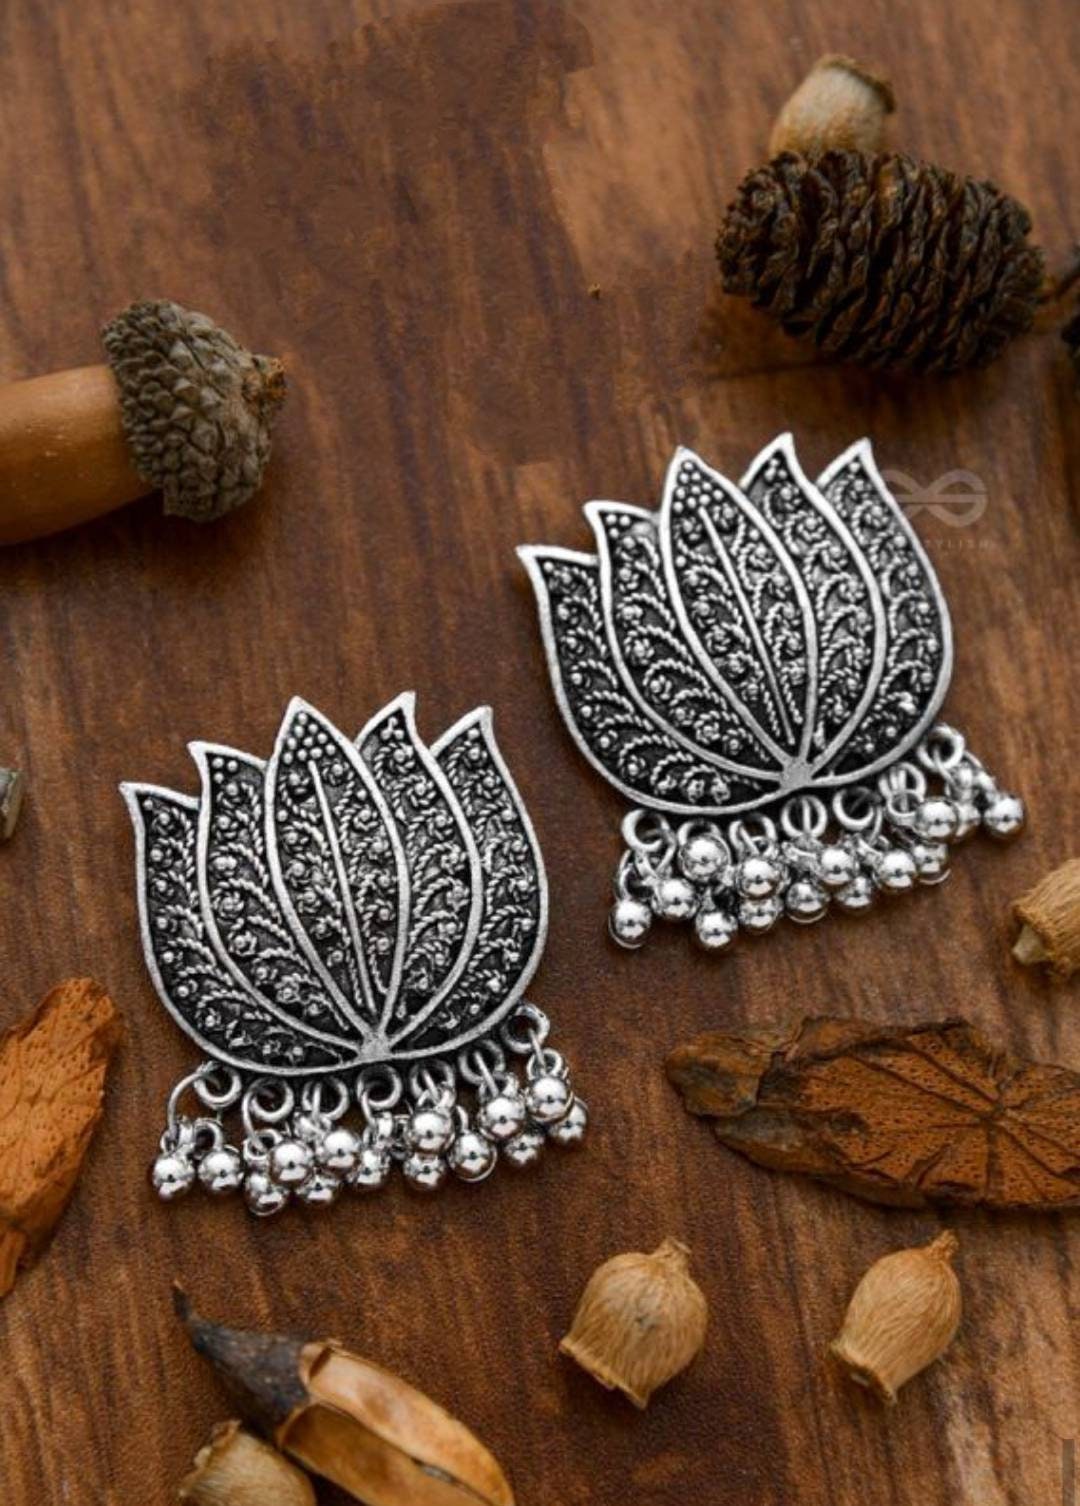 India Traditional Lotus Flower Oxidized Bollywood Jewelry Lotus Top Earrings Chain Jhumka With Ganesh Ji Design Very Cool Casul Earrings | Save 33% - Rajasthan Living 10